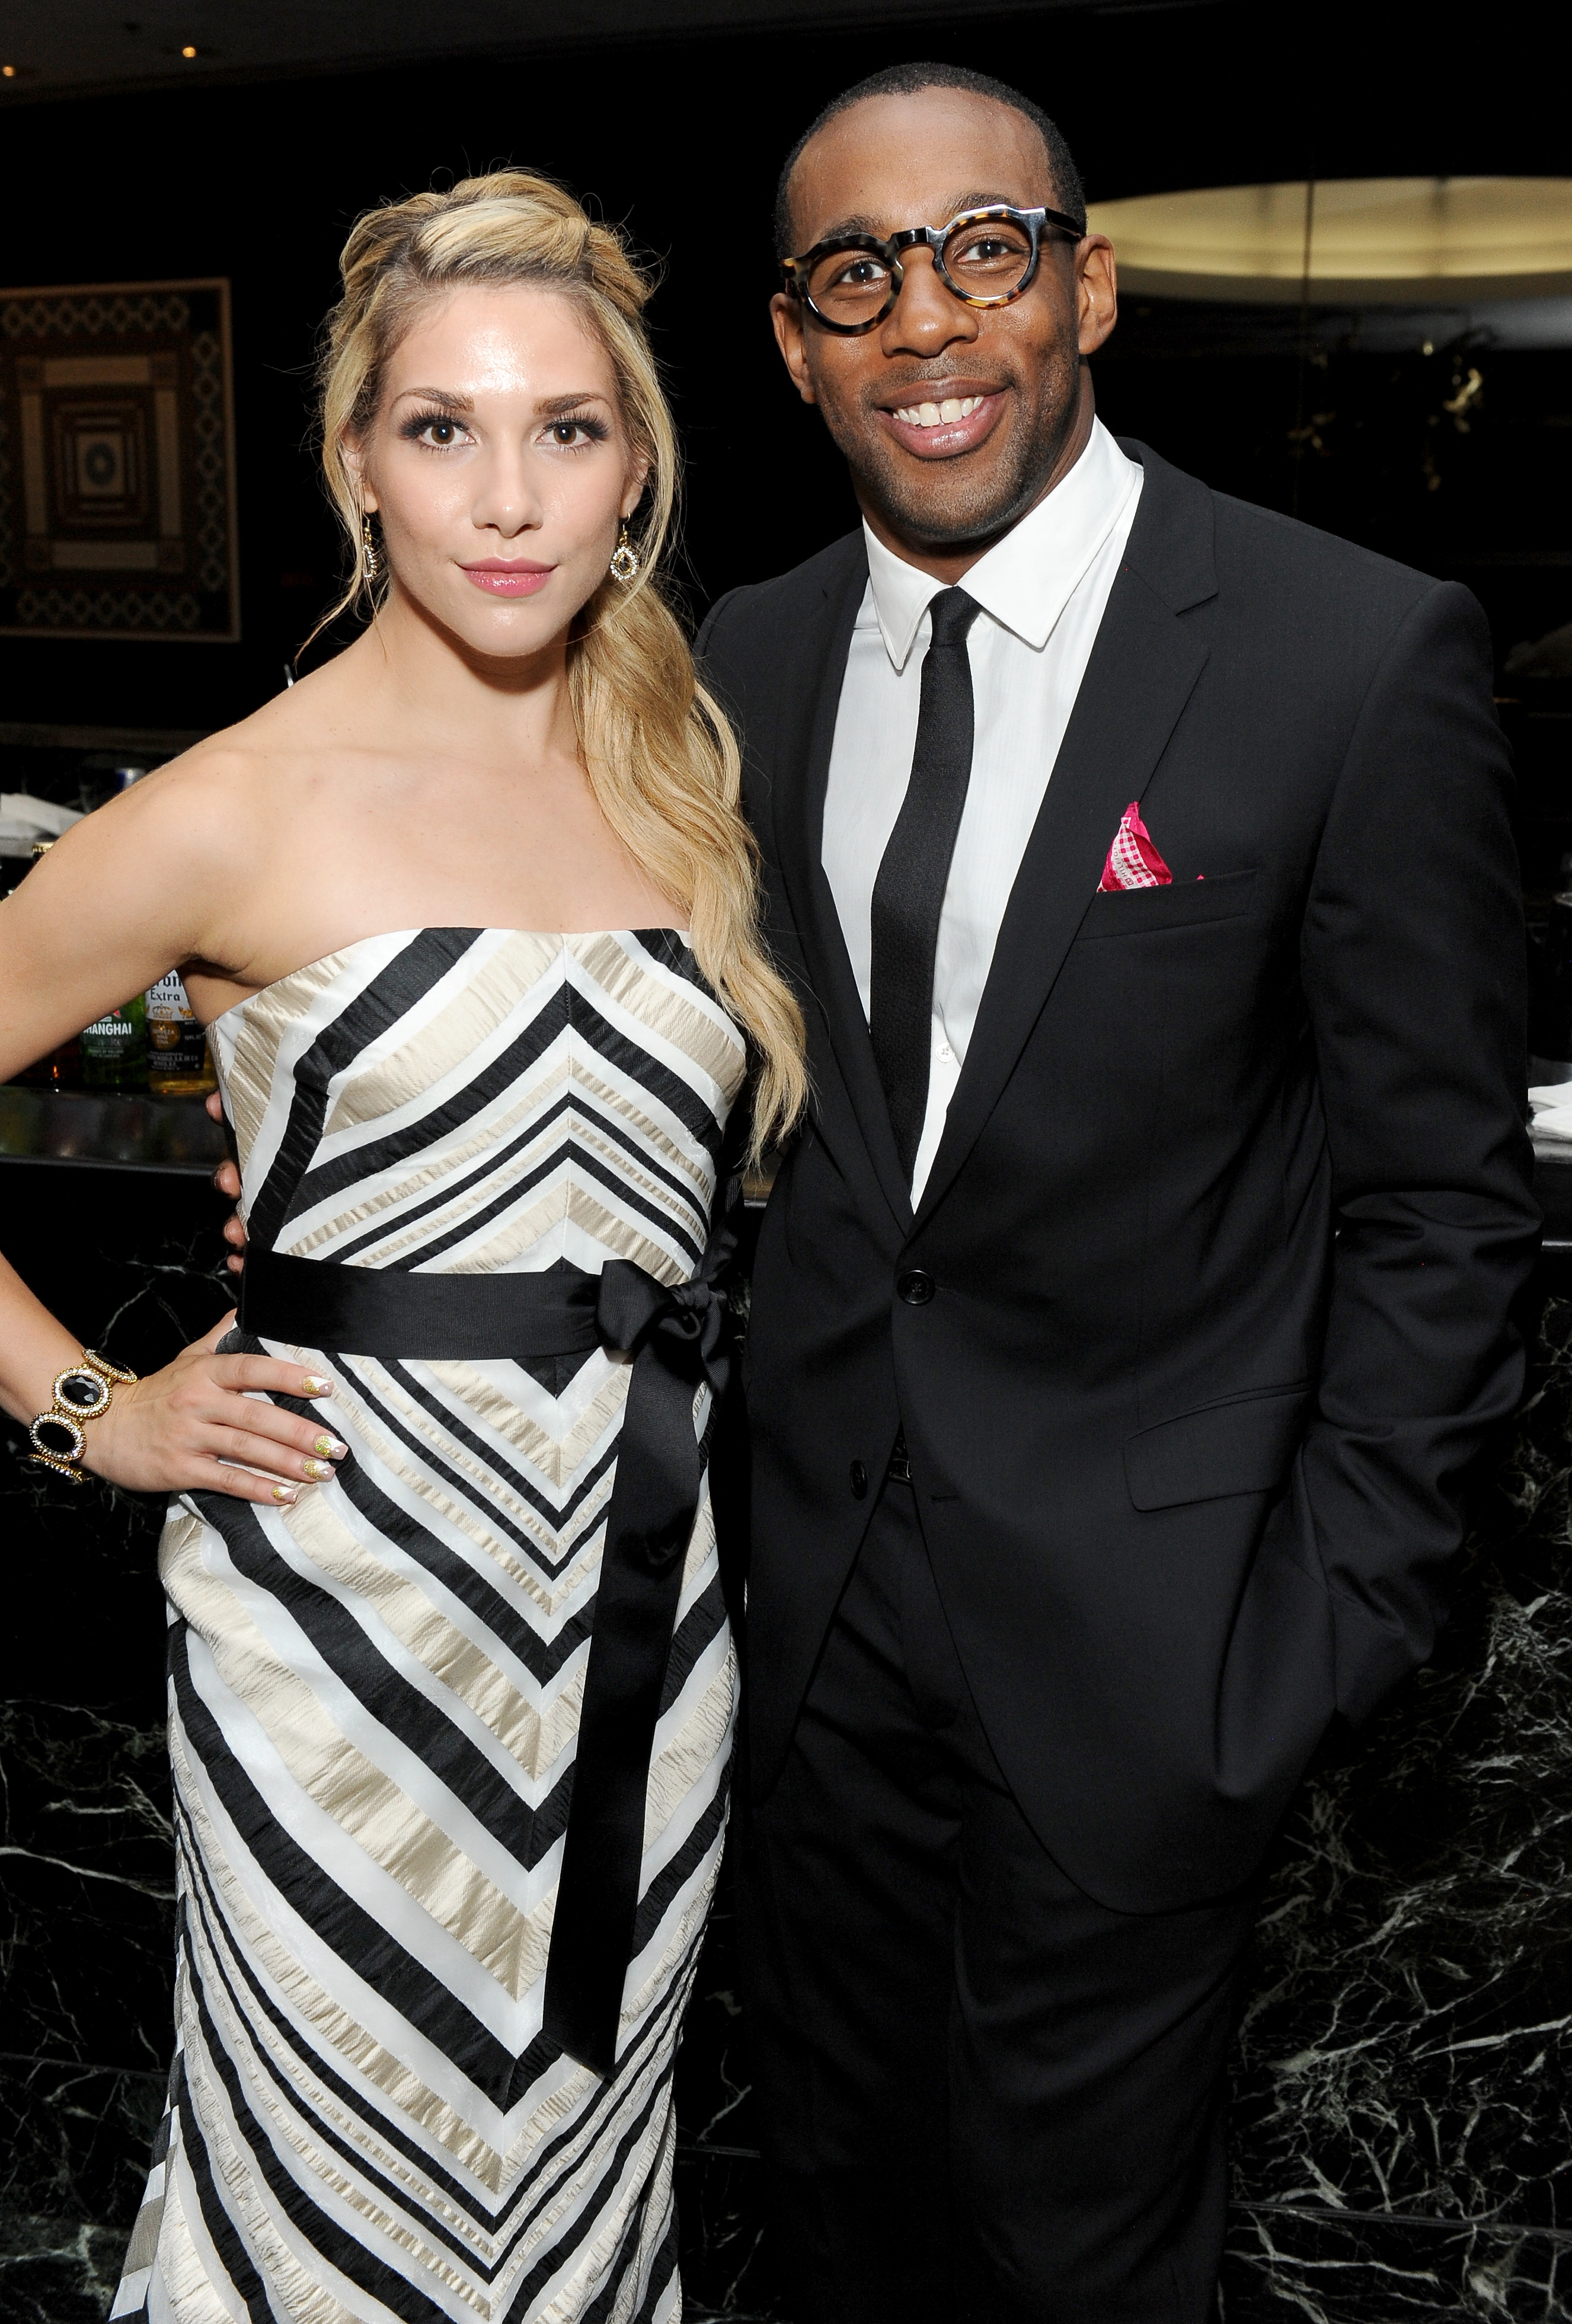 'DWTS' Pro Allison Holker Married "tWitch" From 'SYTYCD' — In Case You